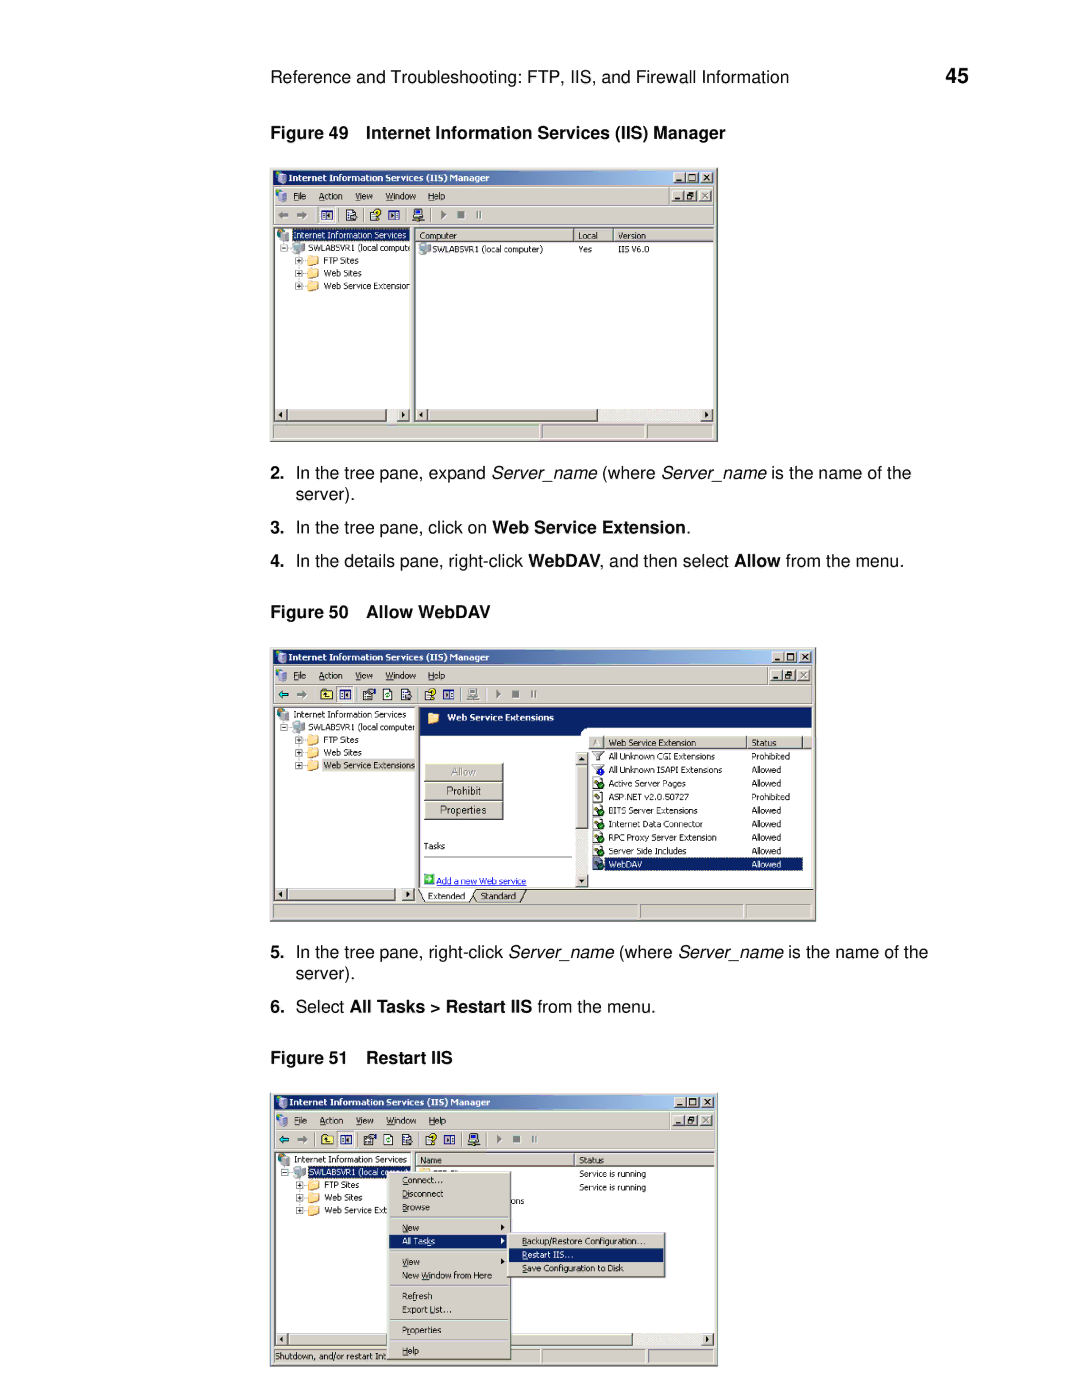 Wyse Technology wyse devise manager release 4.9 manual Allow WebDAV, Restart IIS 